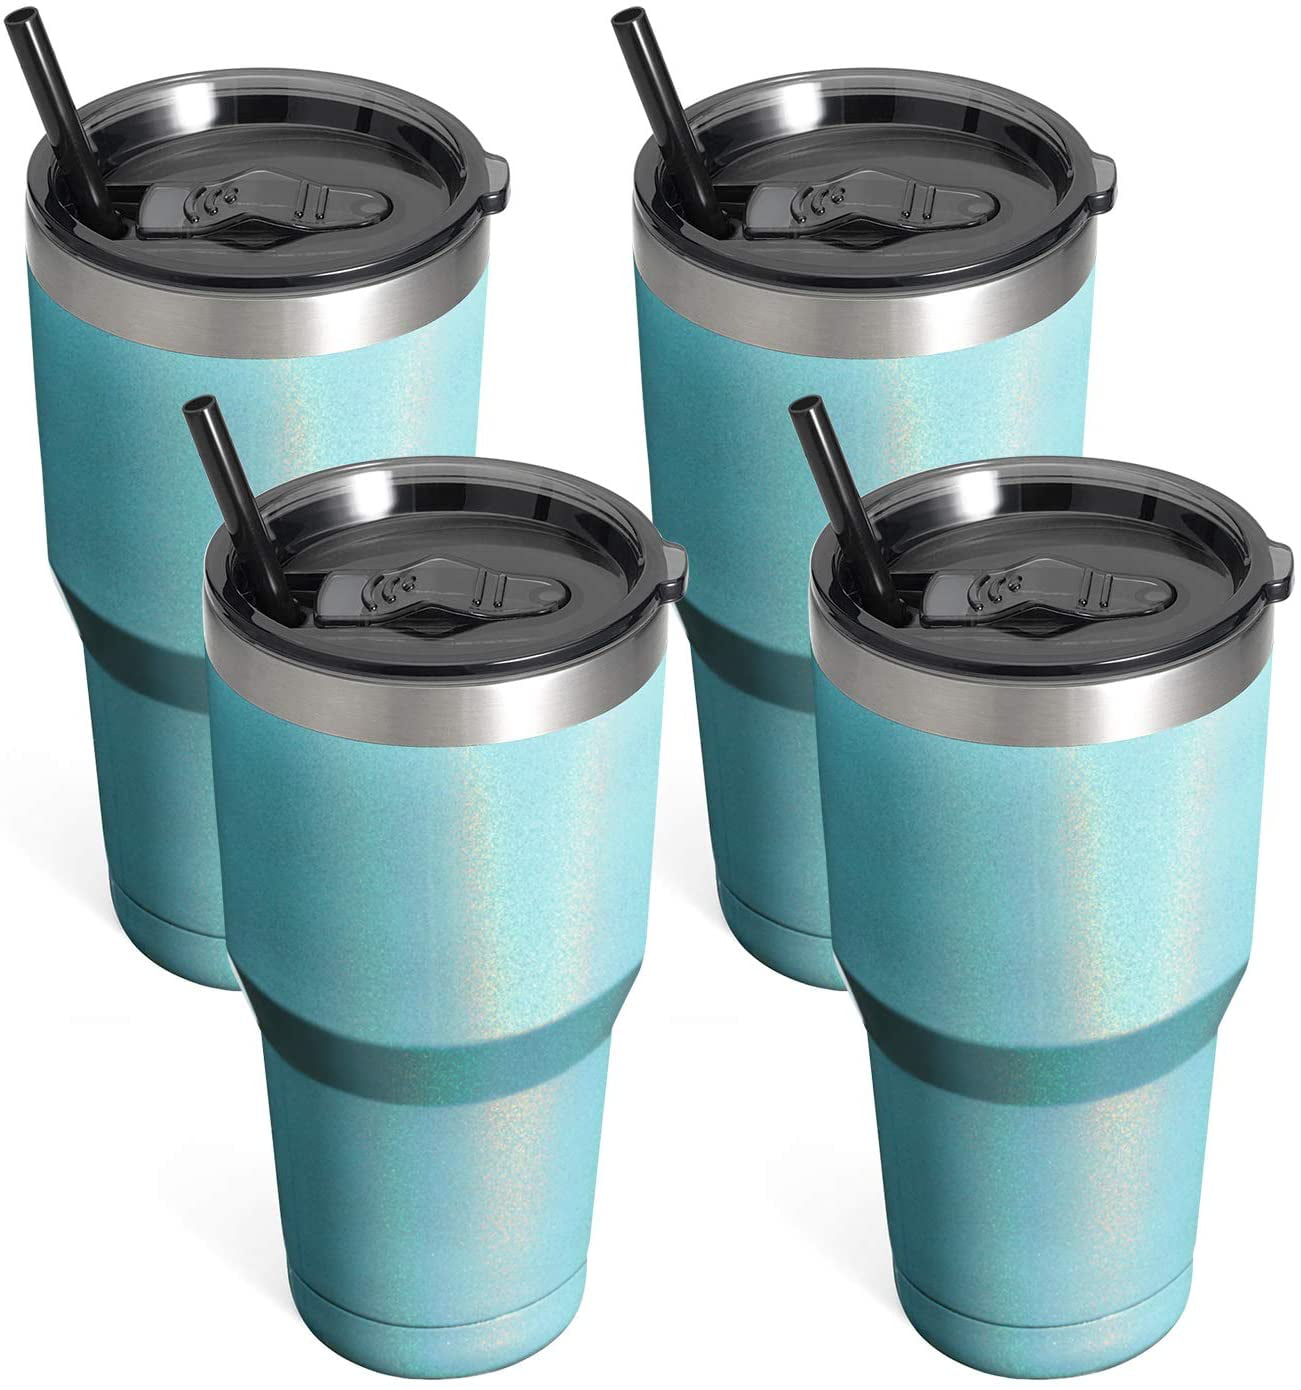 Stainless Steel Double Vacuum Coffee Tumbler Cup Teal 1 pack Party Travel Zibtes 30oz Insulated Tumbler With Lids and Straws Powder Coated Travel Mug for Home Office